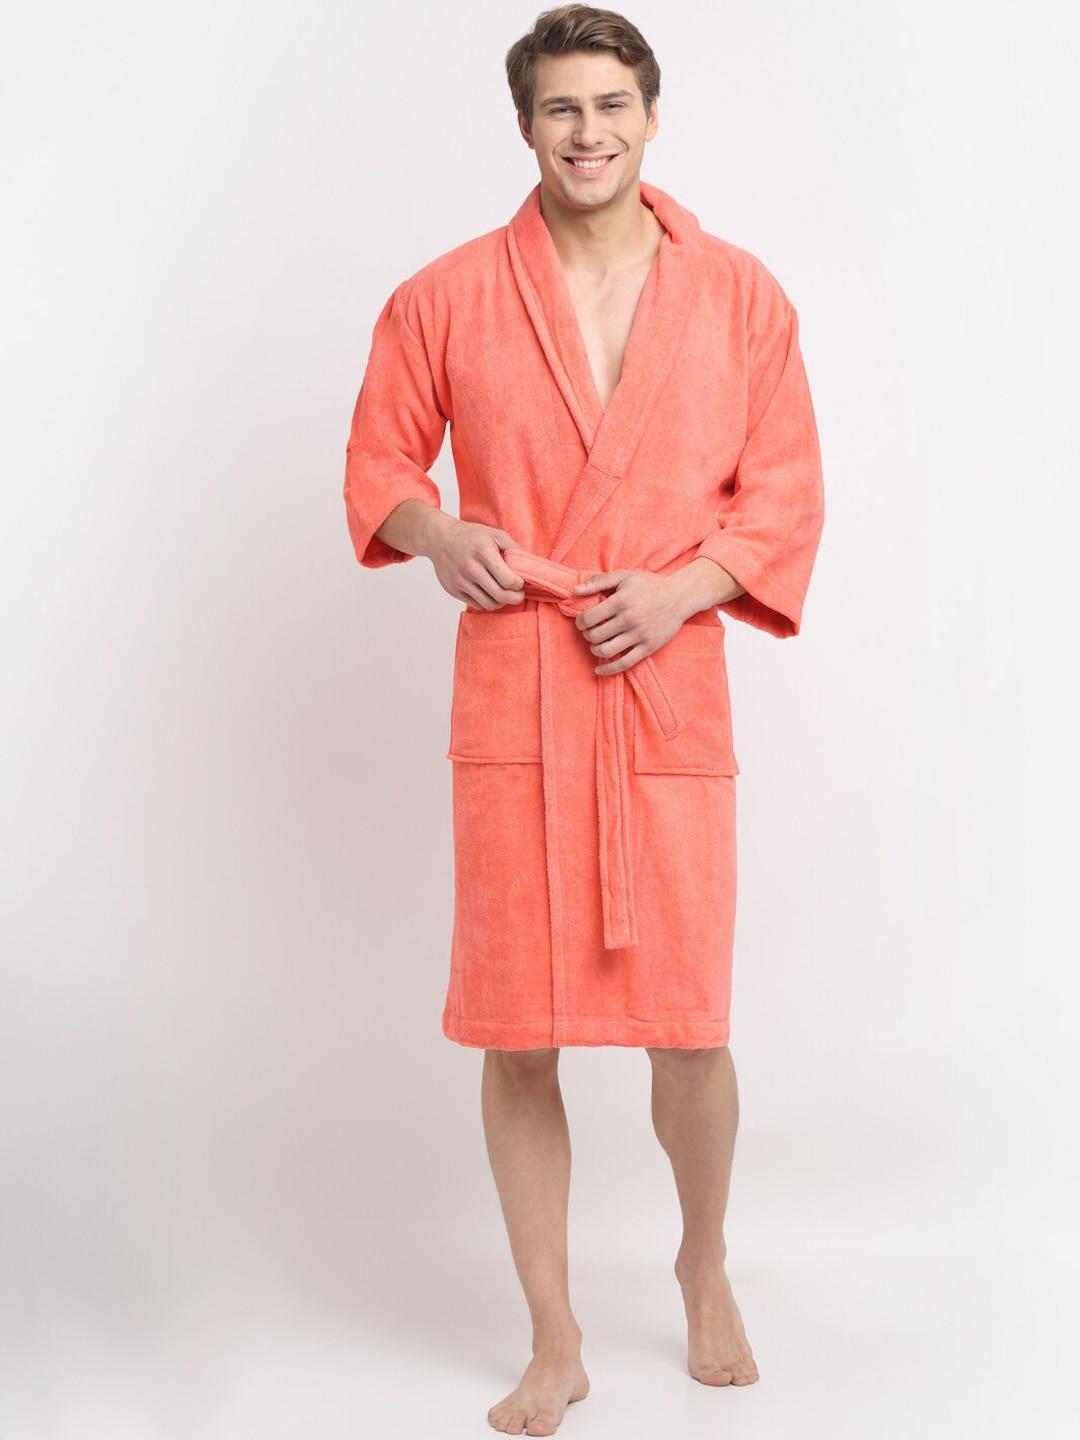 creeva unisex coral-coloured solid bath robe with pockets